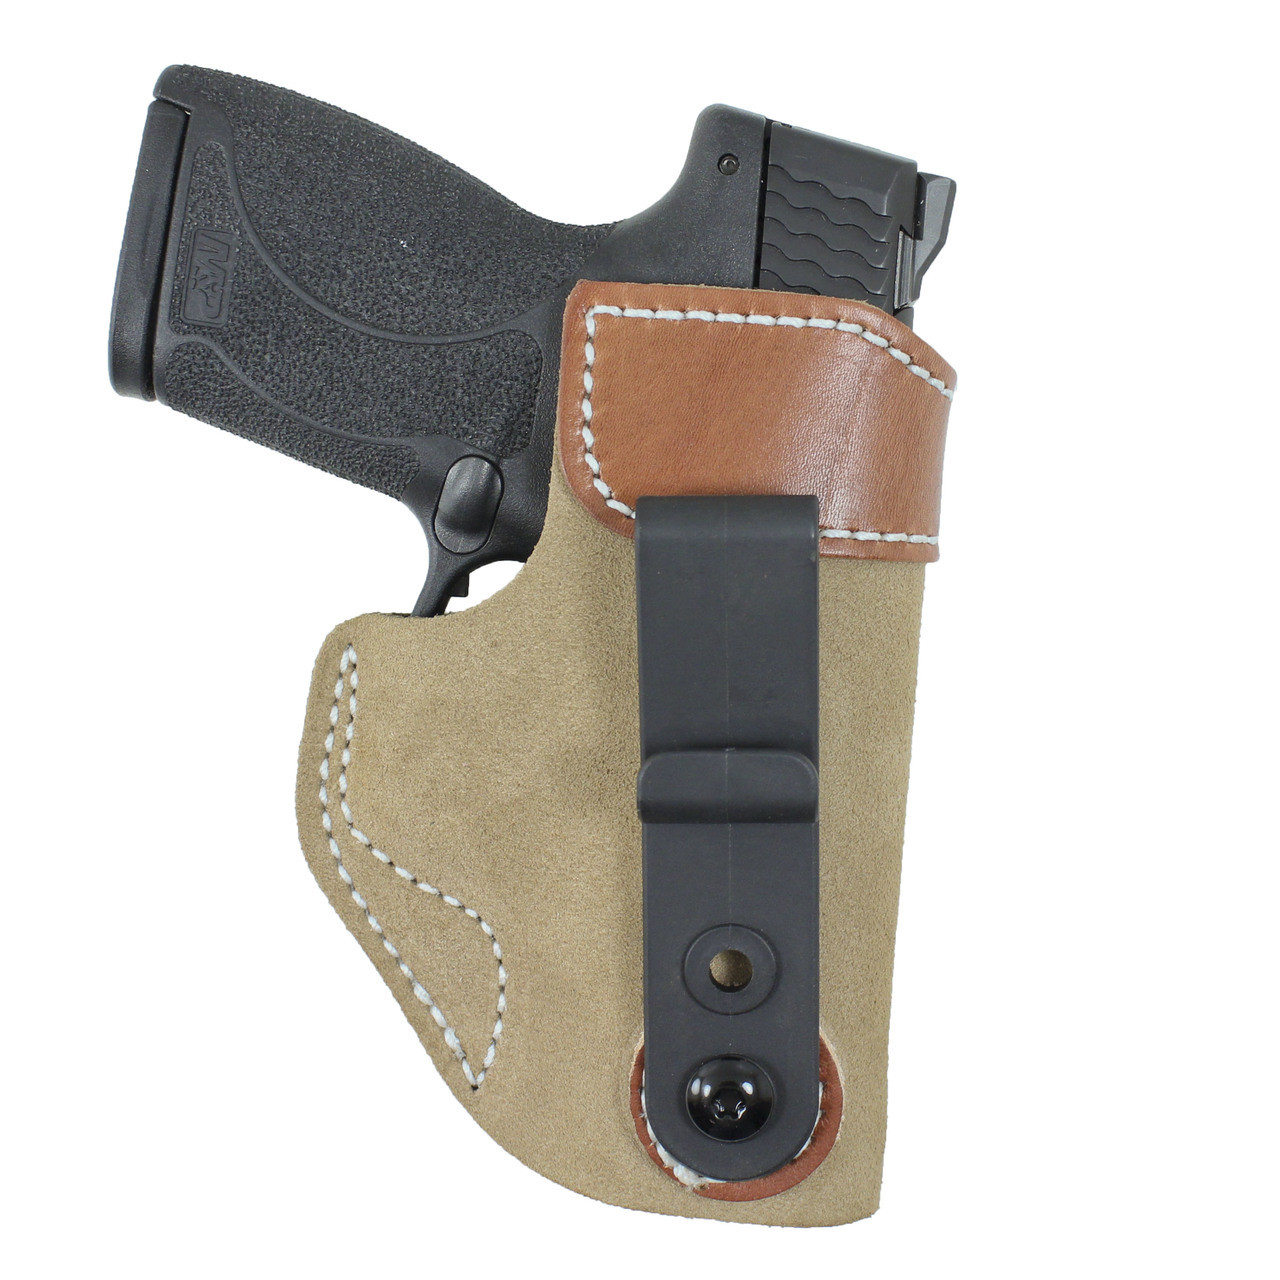 Details about   Right Hand Draw Tactical Pistol Shoulder Holster for Beretta 92F 9mm 1911A1 .45 